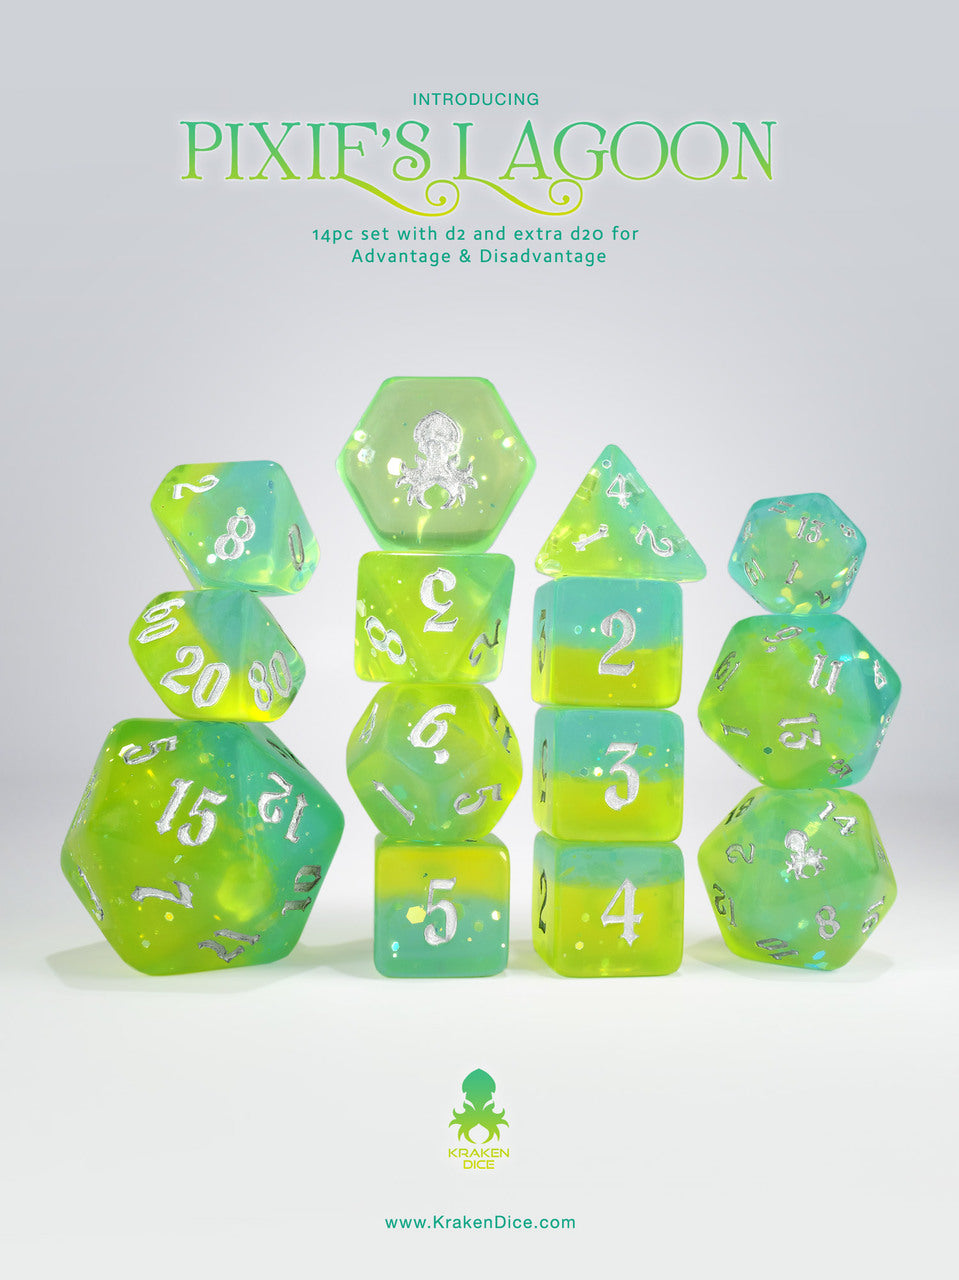 Pixie's Lagoon 14pc - Limited Run - Silver Ink Dice Set - Bards & Cards